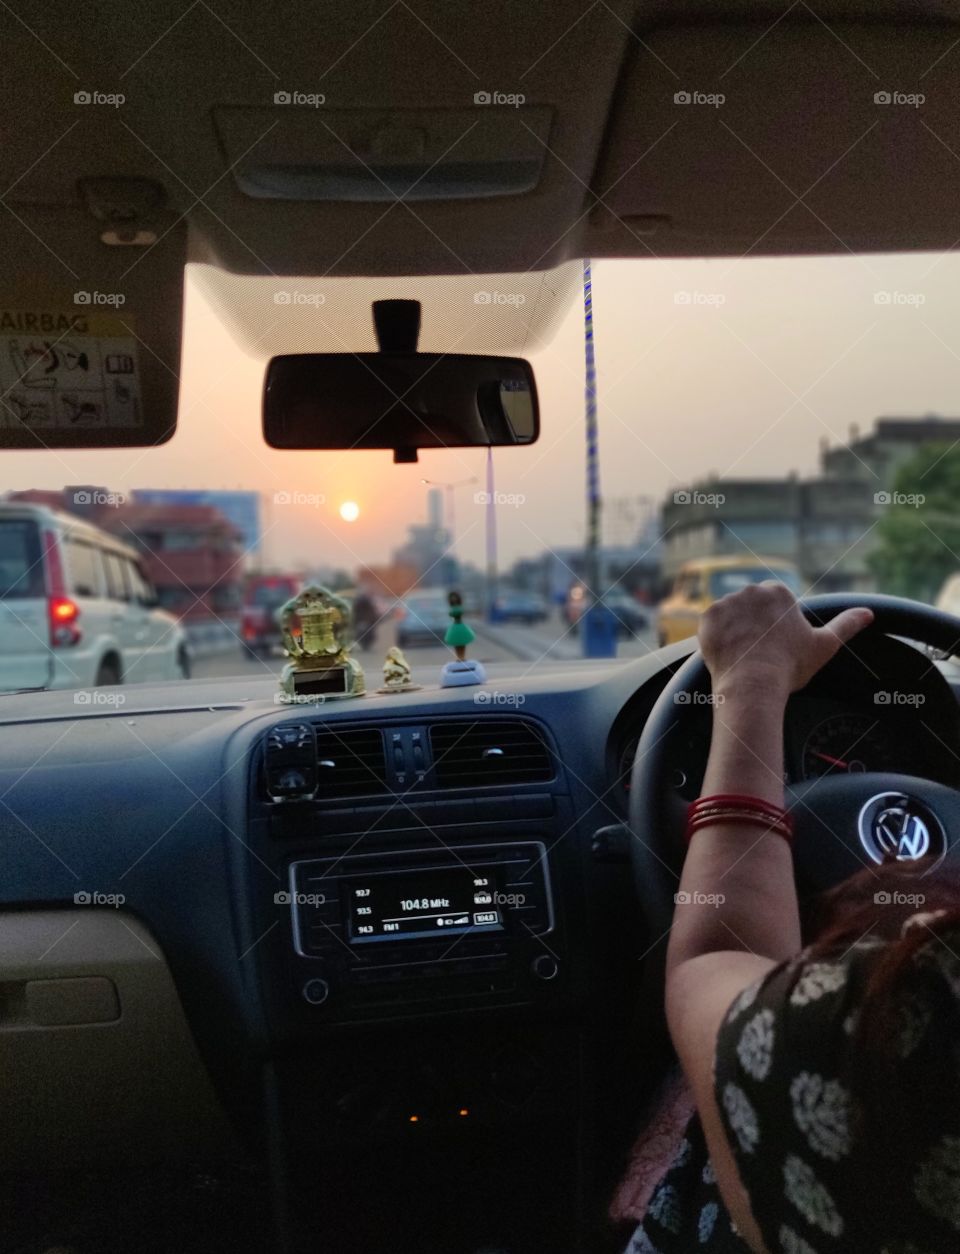 oh the monotonous daily routine of driving back from work to home 😐...the only thing I like is witnessing a sunset sometime on the way..life is good 🙂